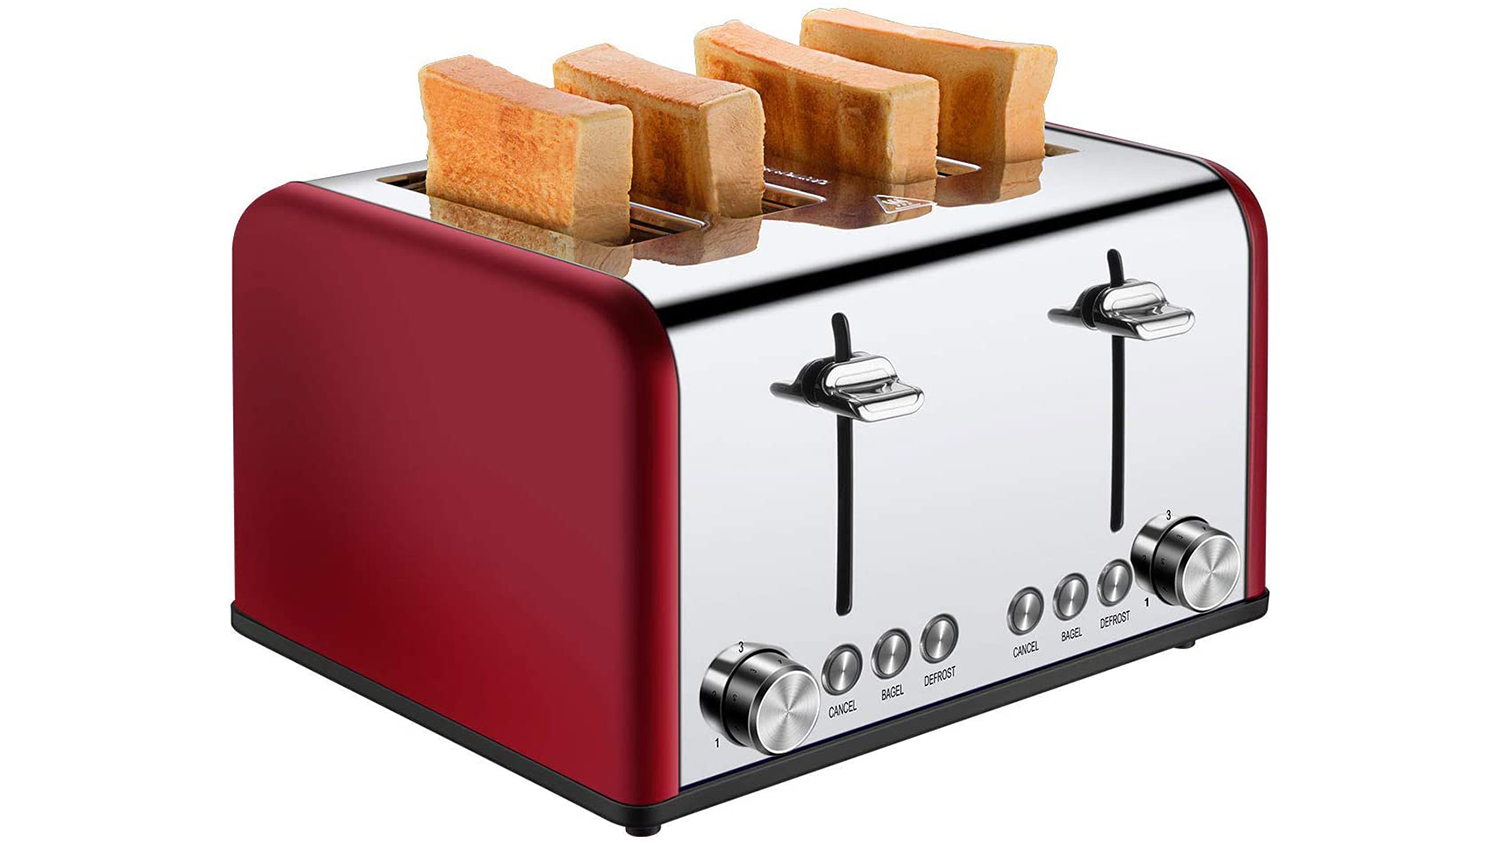 Waffles Toaster 2 Slice Best Rated Prime Wide Slot Stainless Steel Toasters Compact Retro Toaster with 7 Bread Shade Setting & Removable Crumb Tray for Bread 